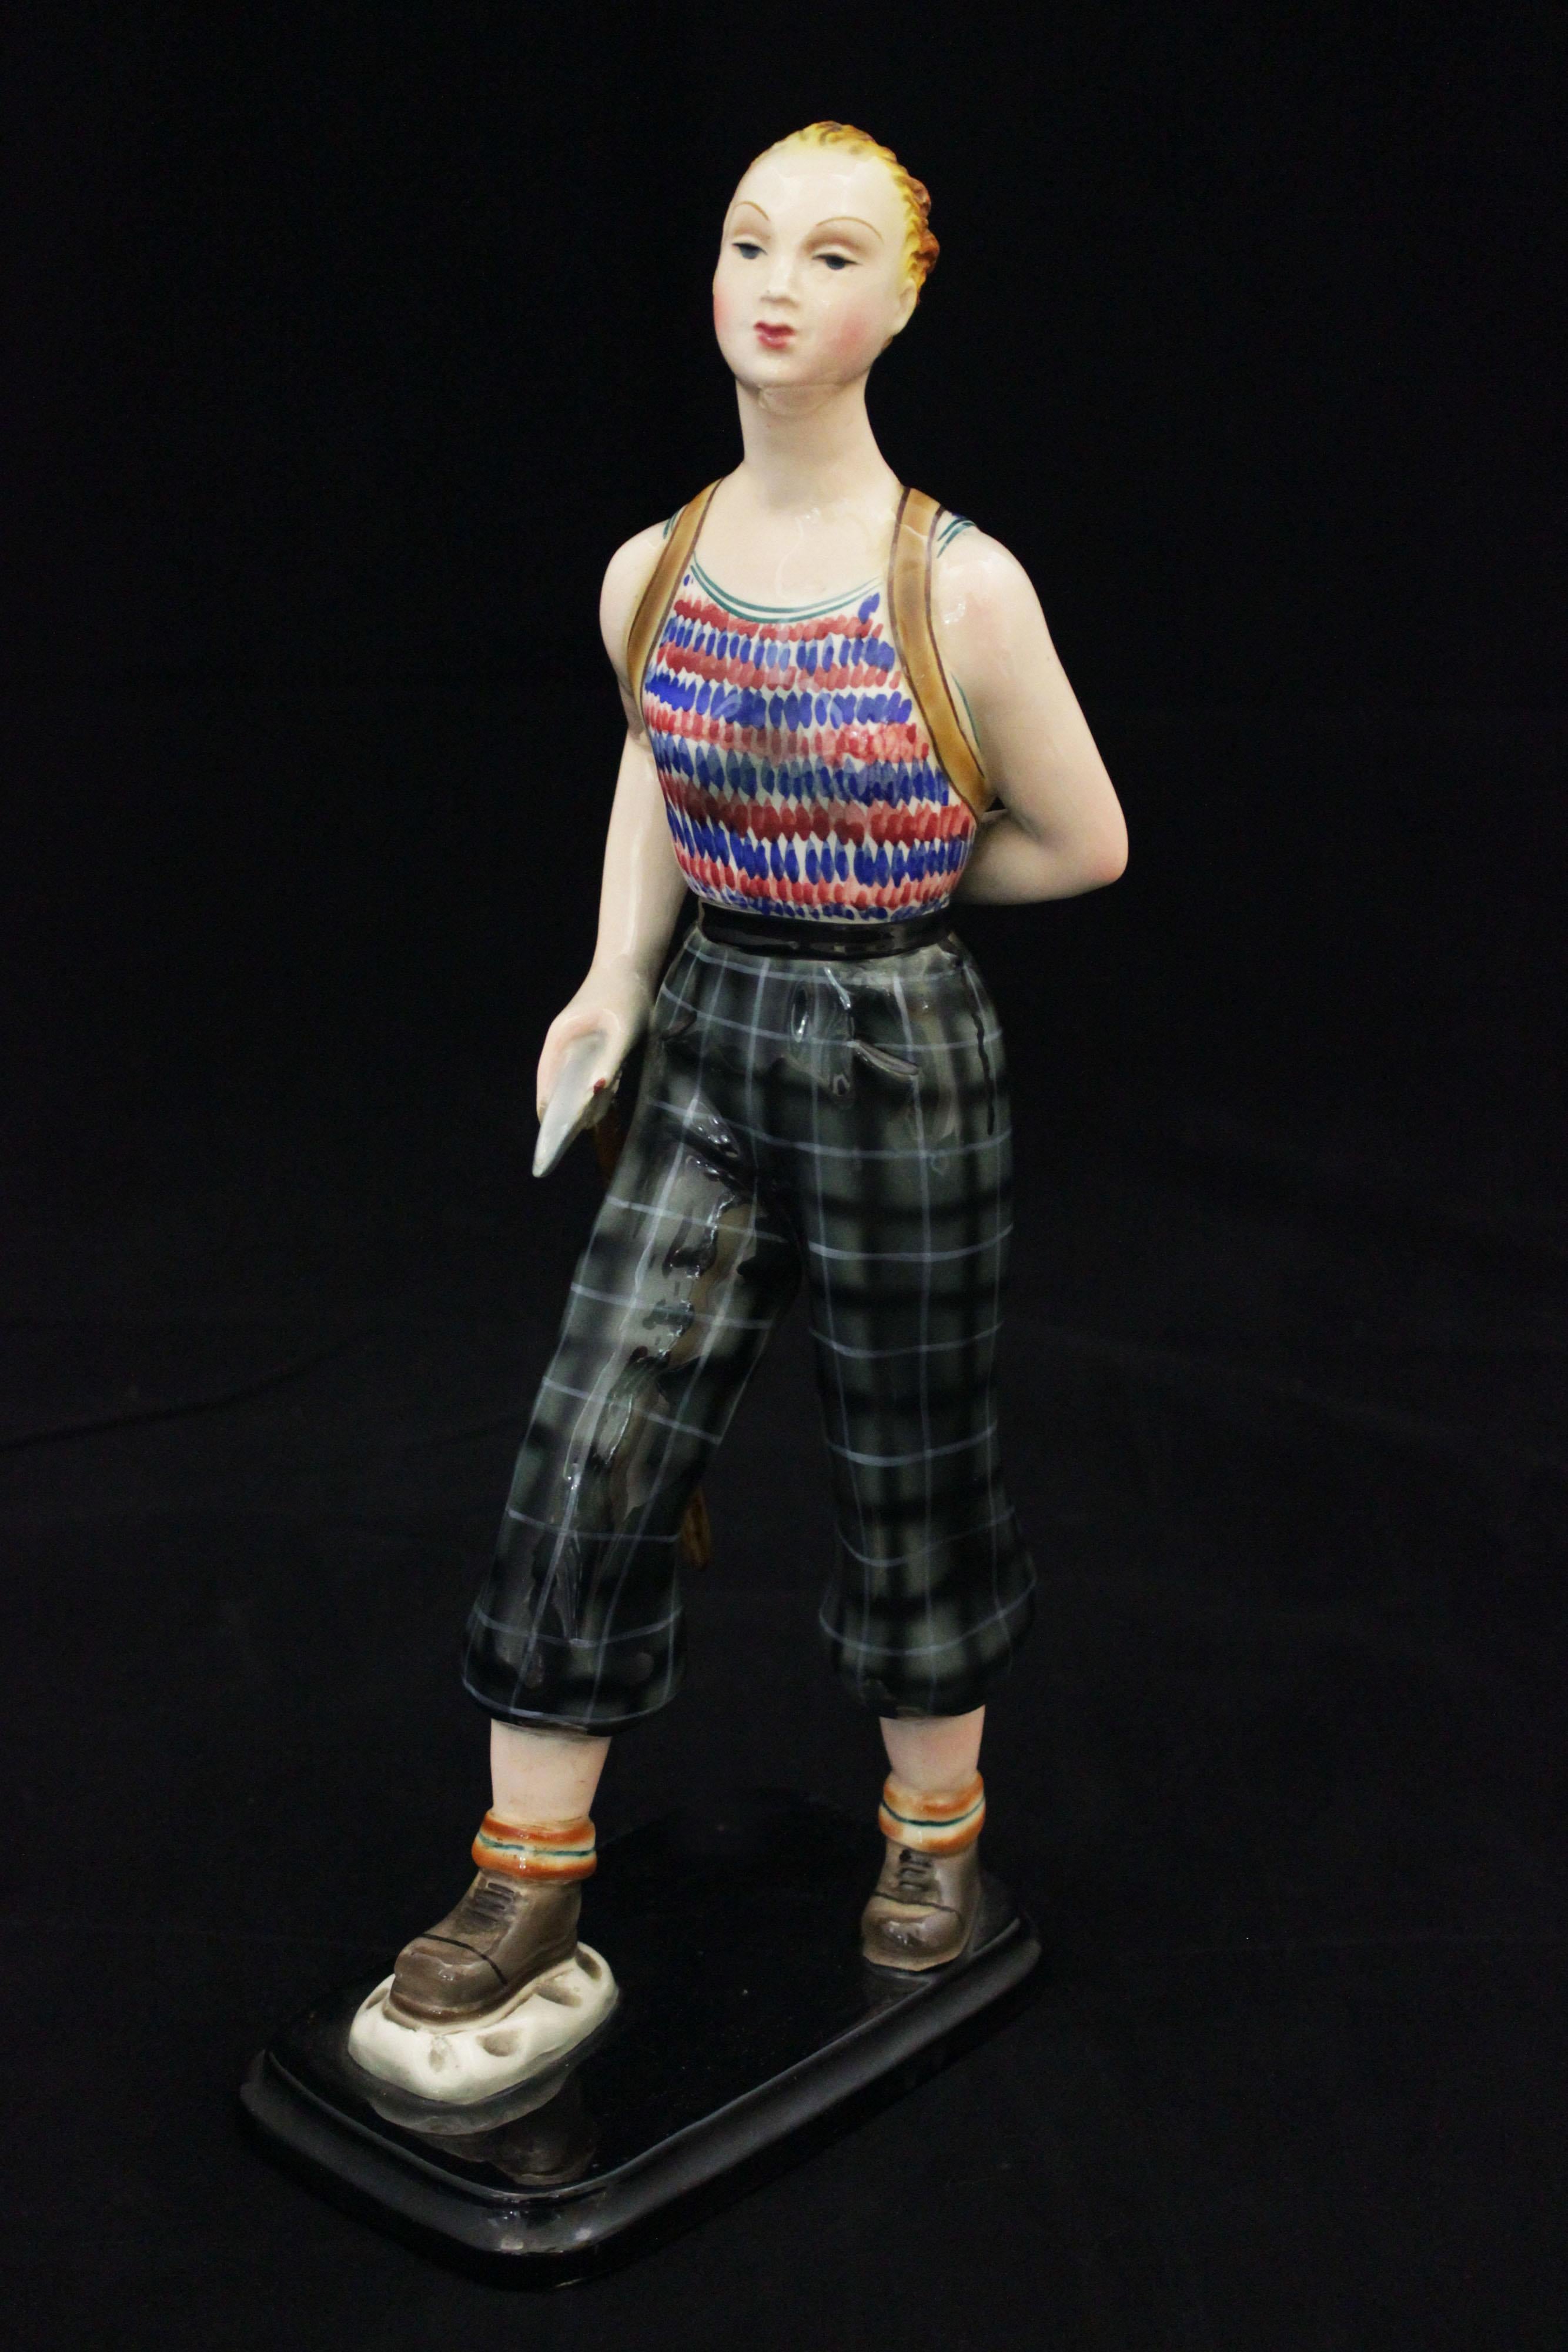 Hiker ceramic sculpture from Amba, 1950s.
Packaging with bubble wrap and cardboard boxes is included. If the wooden packaging is needed (crates or boxes) for US and International Shipping, it's required a separate cost (will be quoted separately).